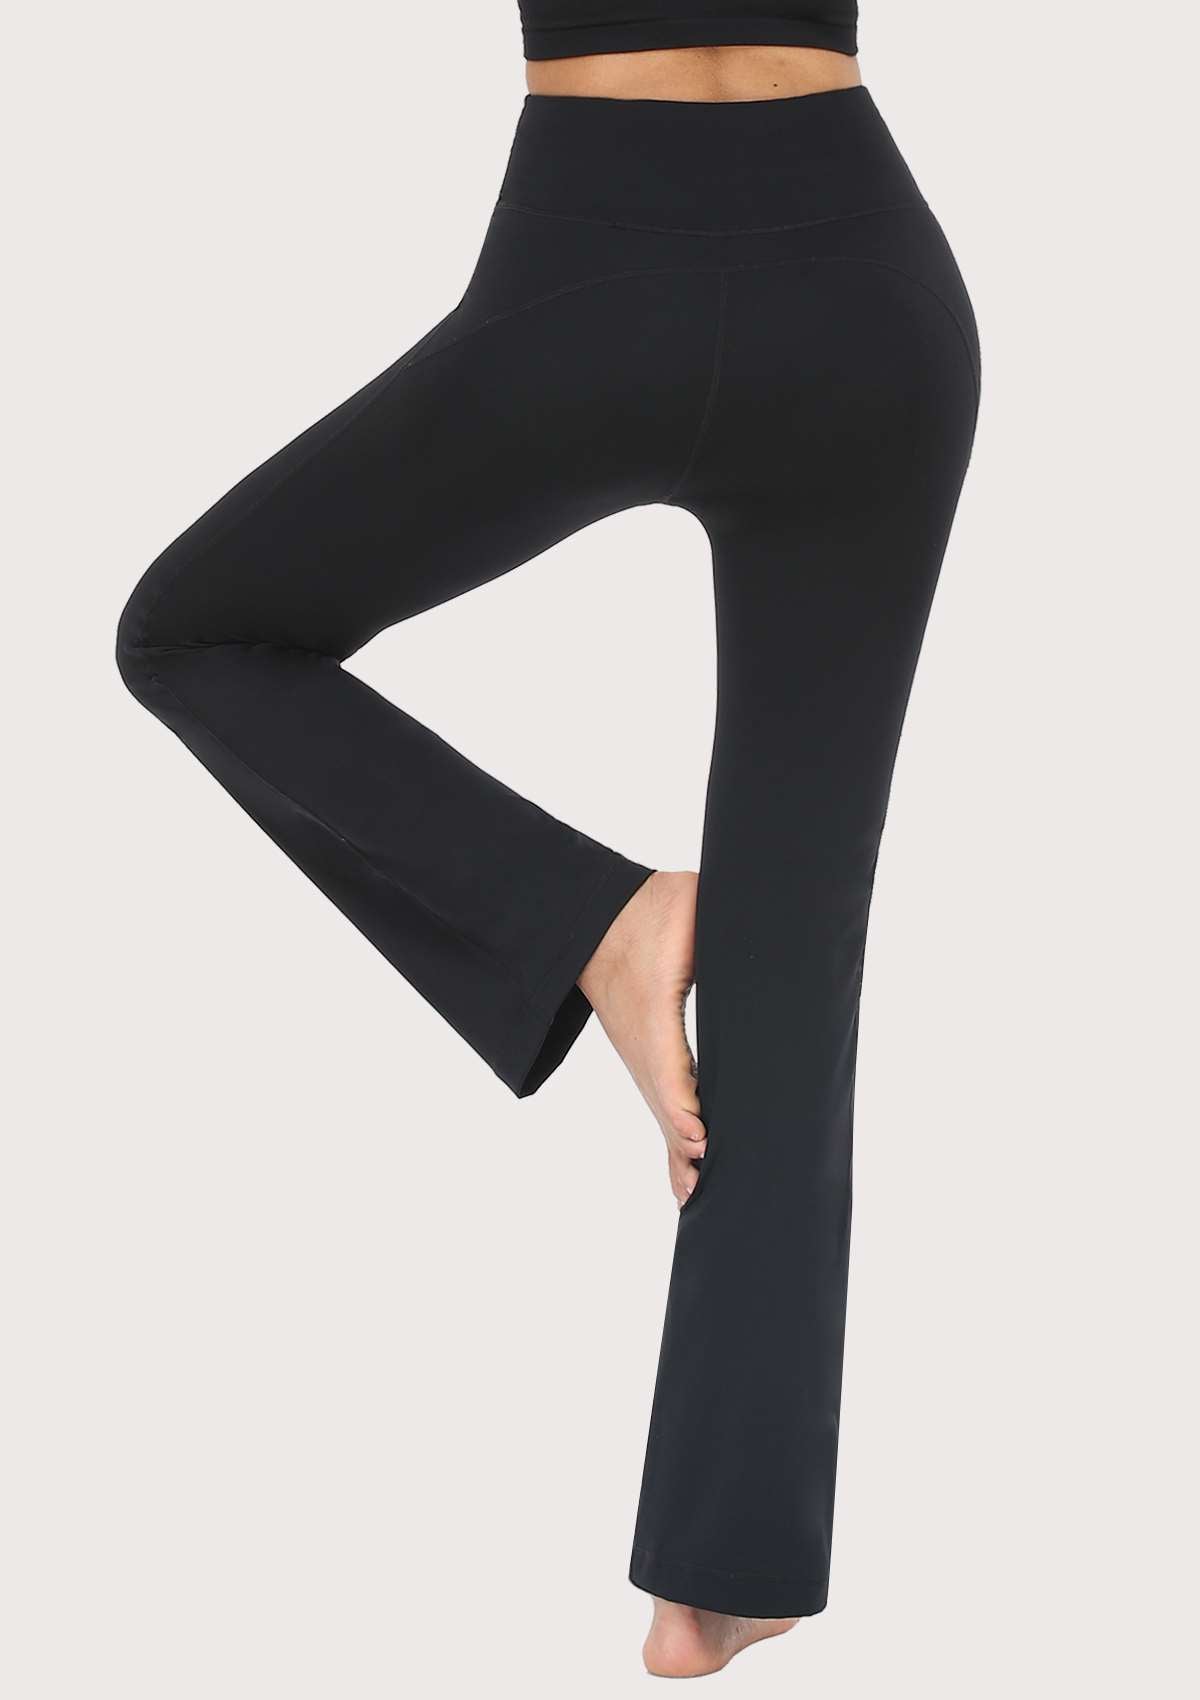 SONGFUL Smooth High Waisted Bootcut Yoga Sports Pants - XS / Dark Grey